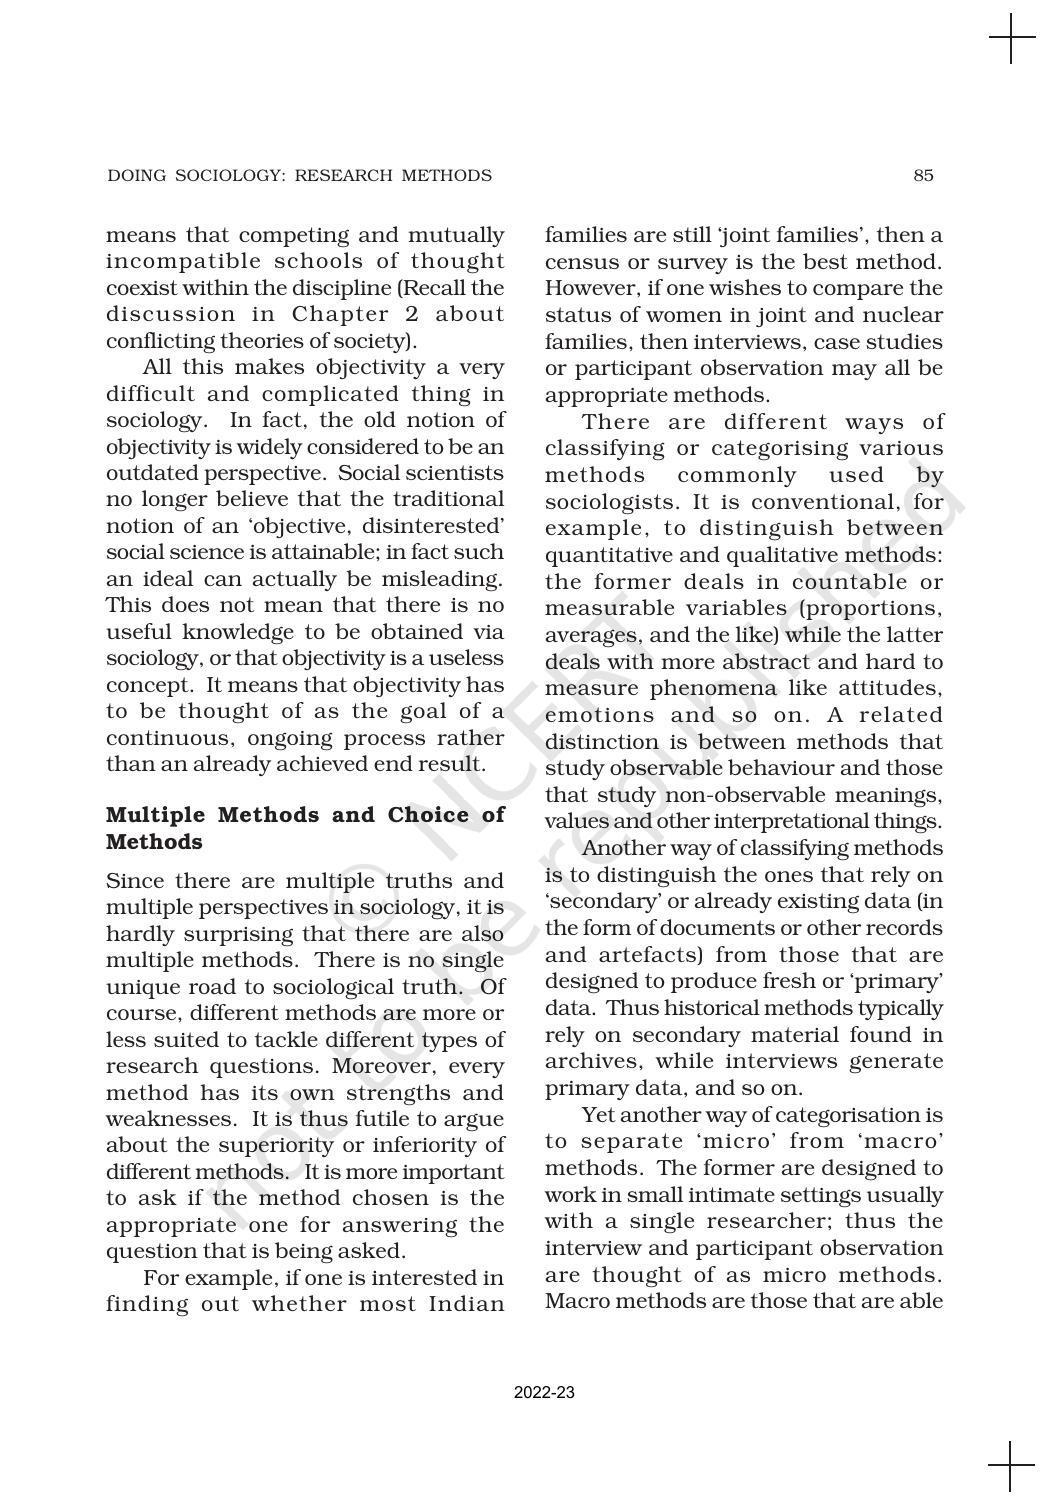 NCERT Book for Class 11 Sociology (Part-I) Chapter 5 Doing Sociology: Research Methods - Page 4